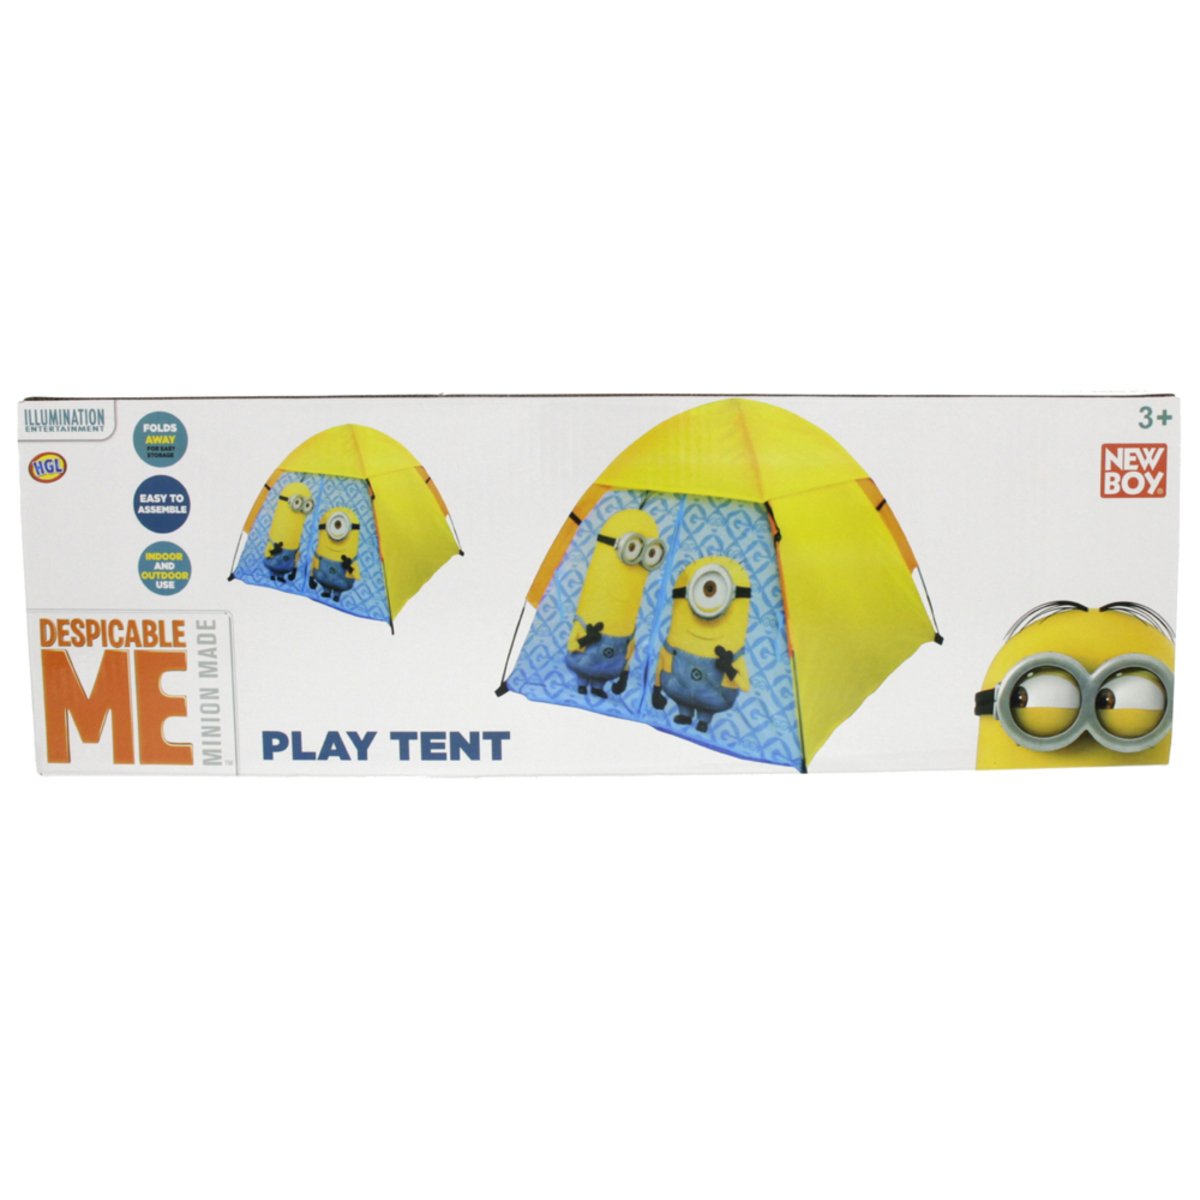 Despicable Me Minions Play Tent